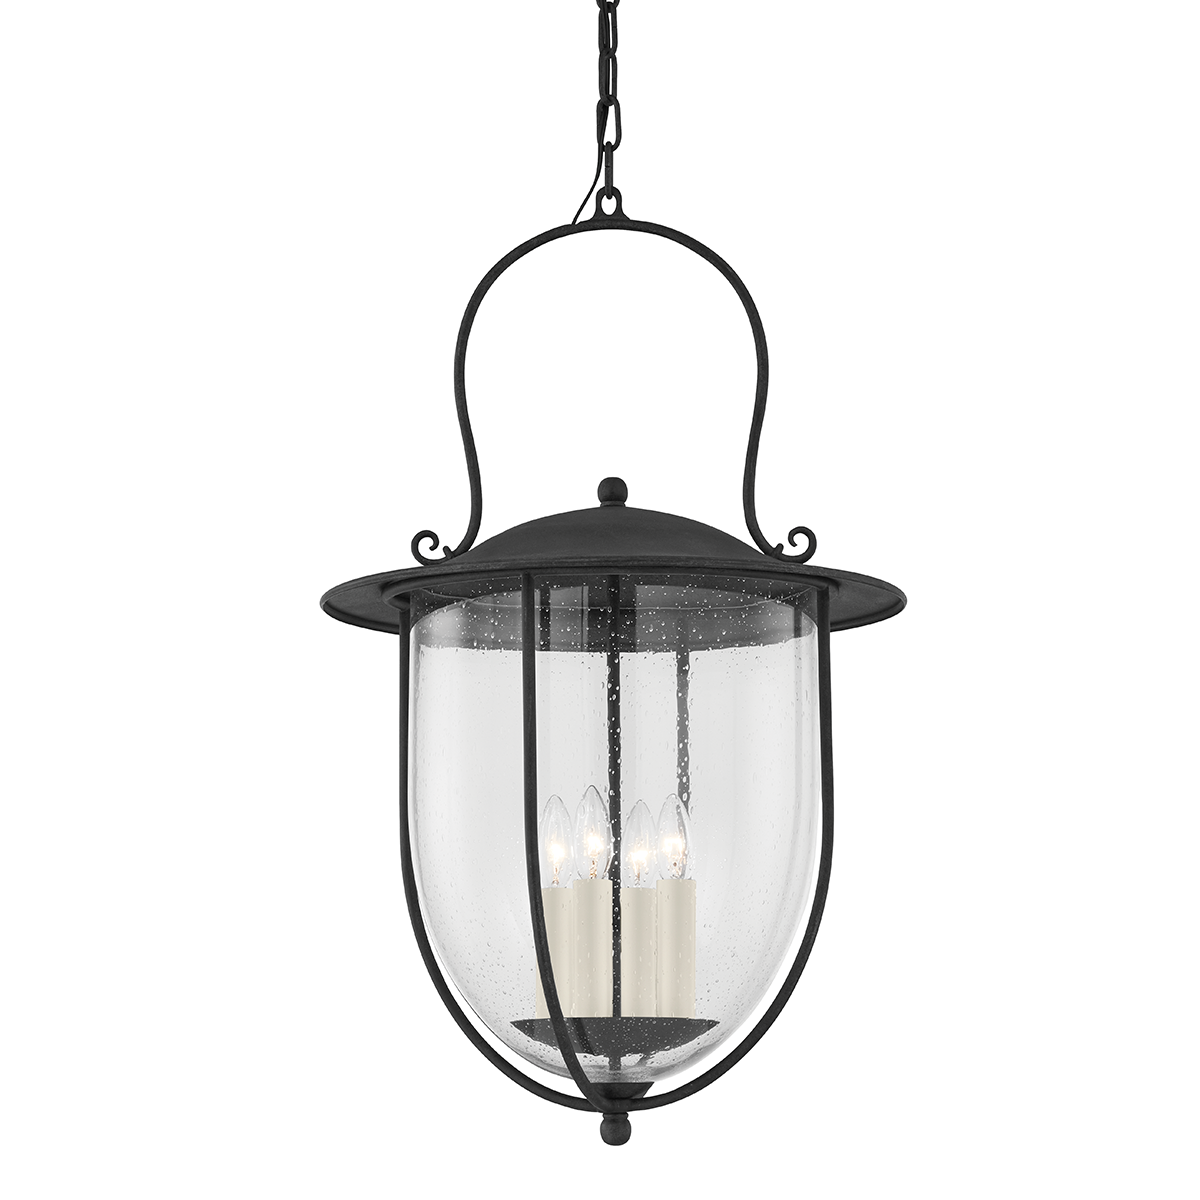 Troy Lighting 4 LIGHT LARGE EXTERIOR PENDANT F5731 Outdoor Light Fixture l Hanging Troy Lighting FRENCH IRON  